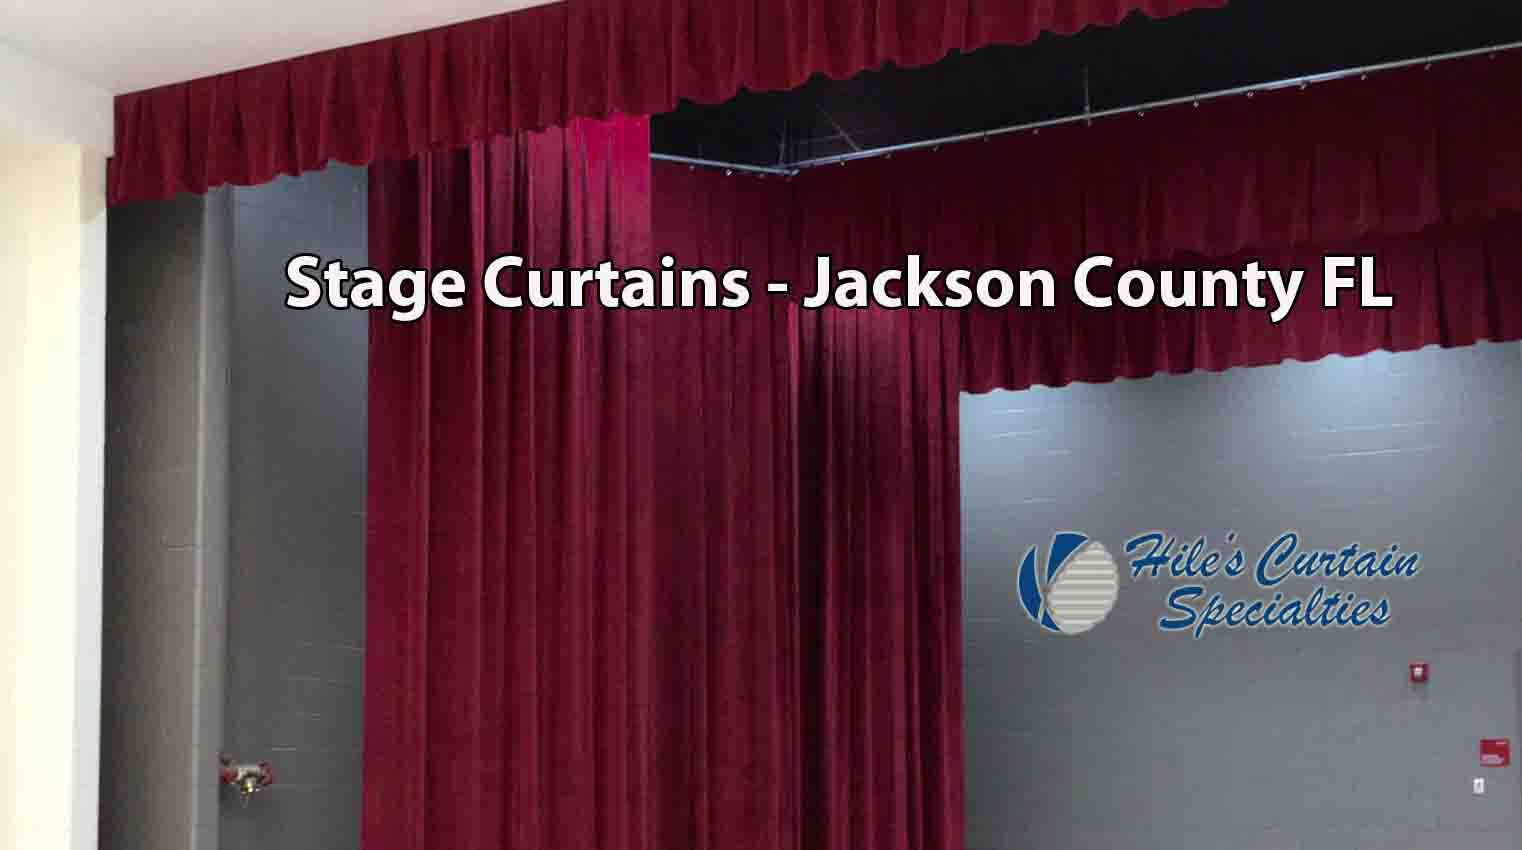 Stage Curtains - Jackson County FL